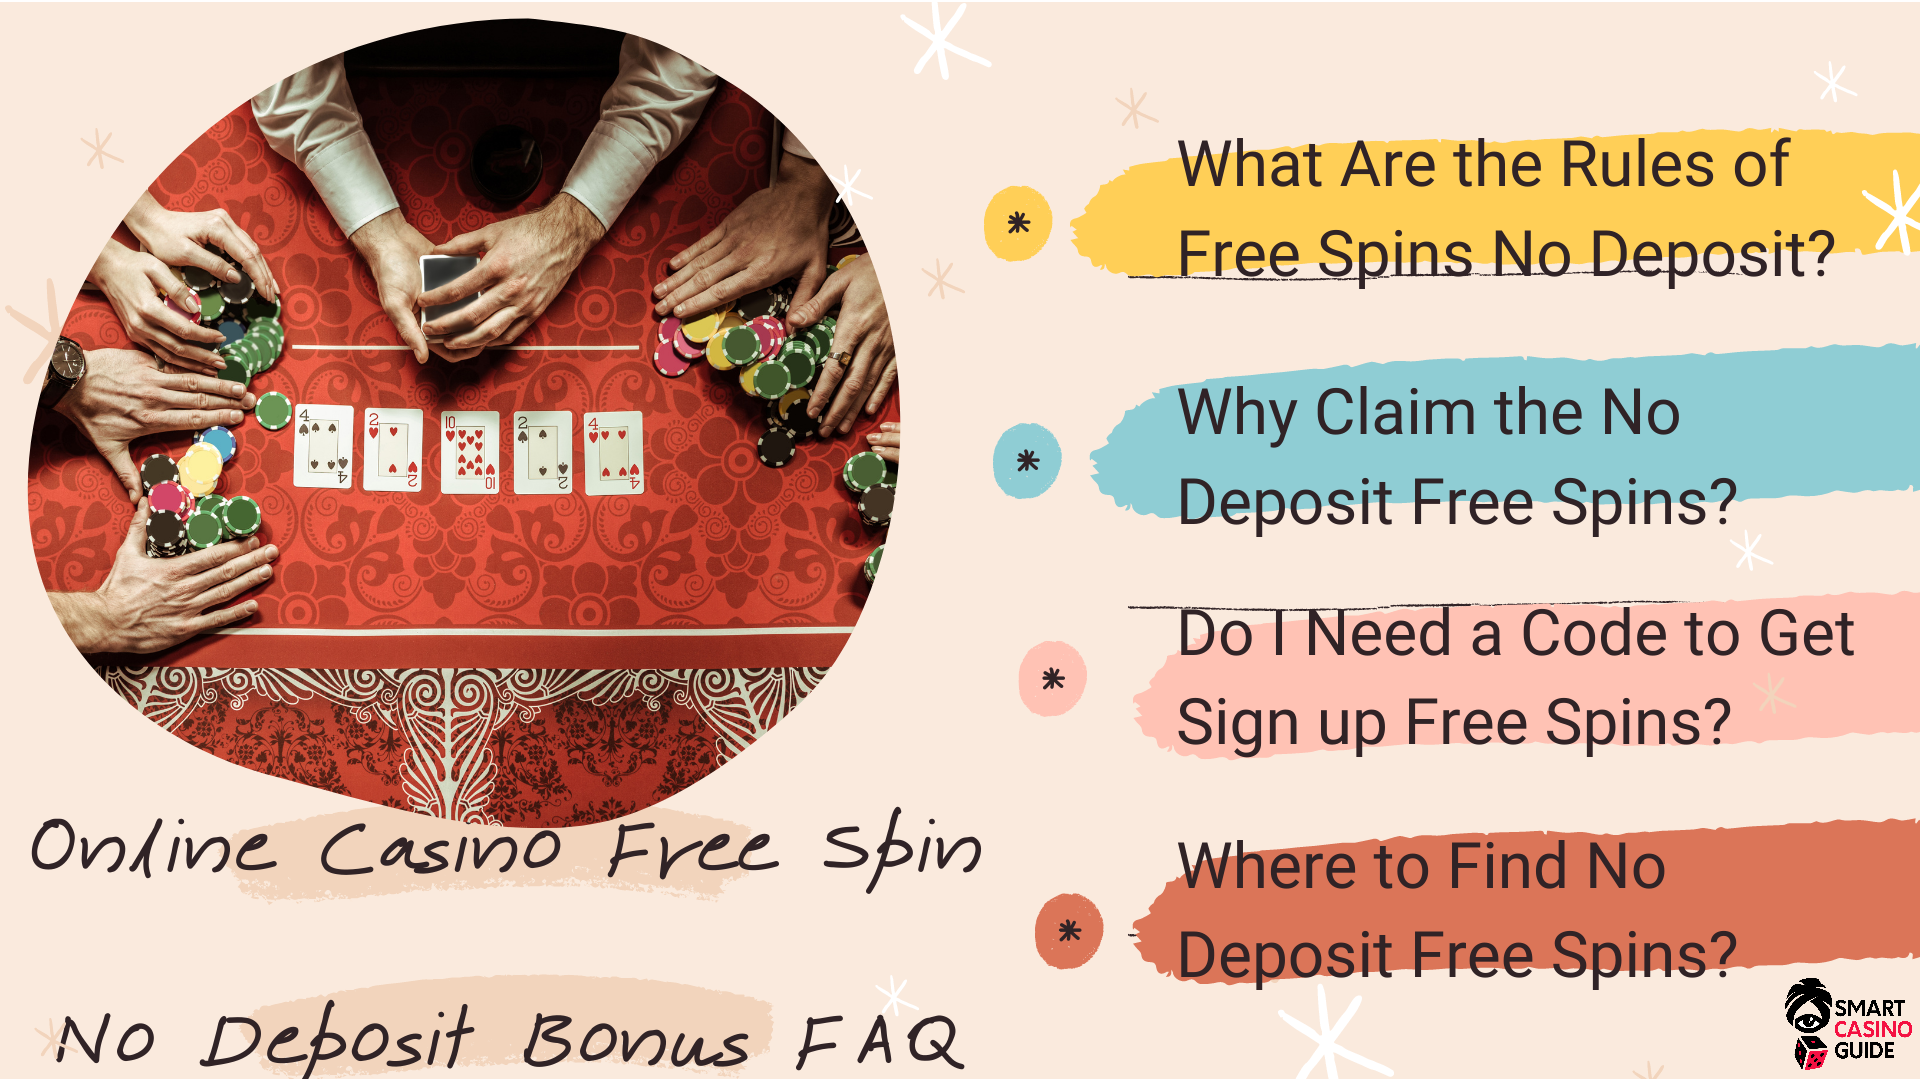 7 Strange Facts About FairSpin casino